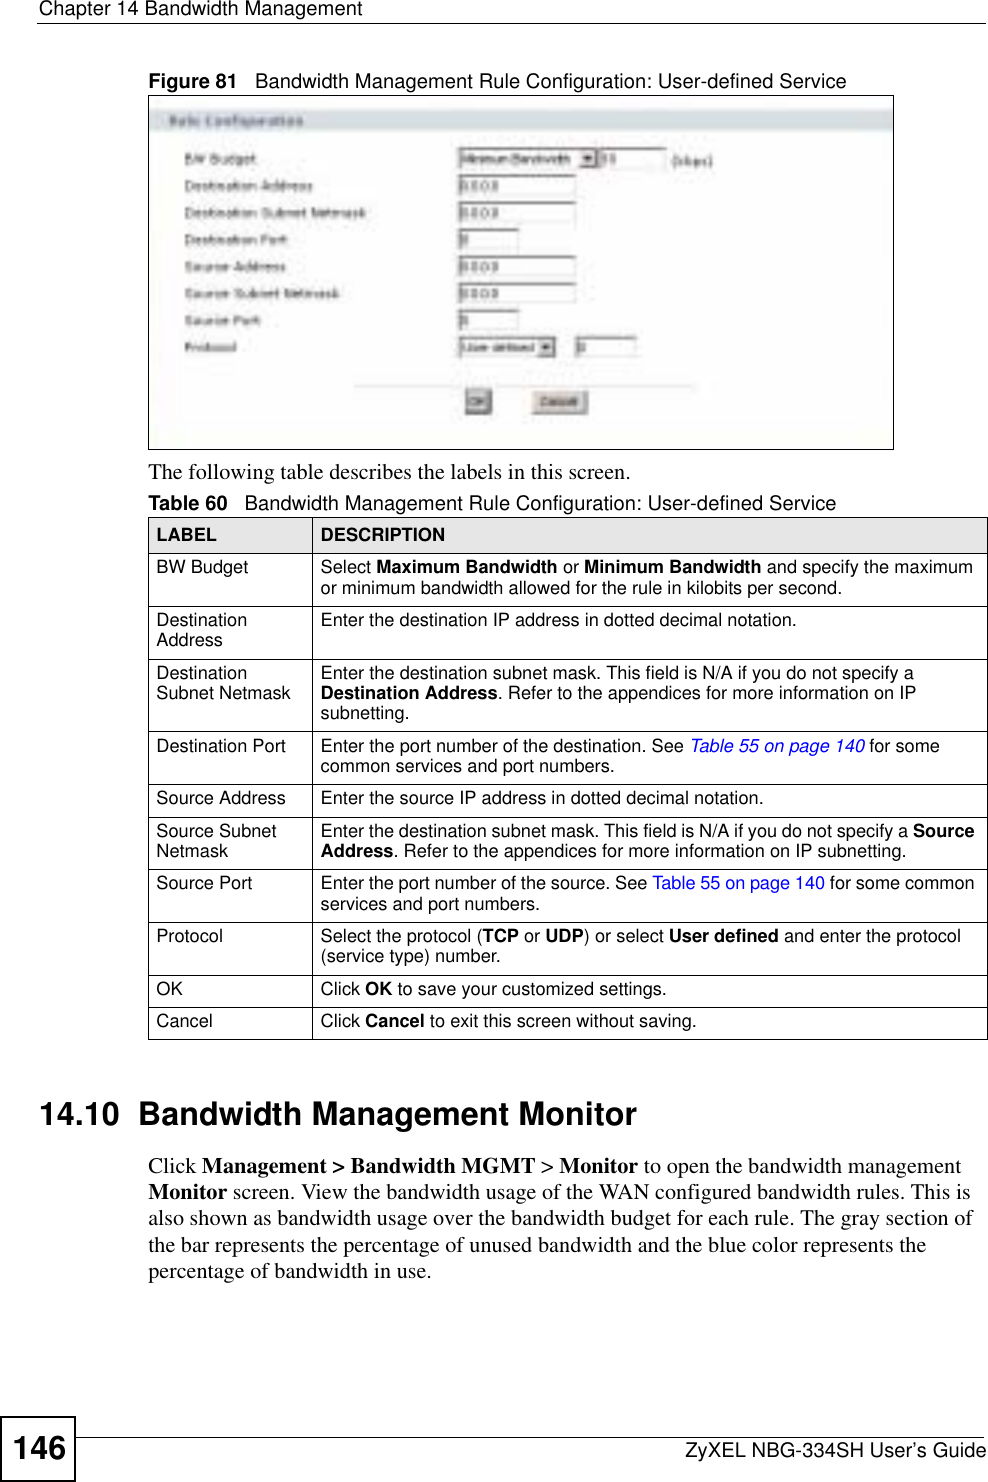 Chapter 14 Bandwidth ManagementZyXEL NBG-334SH User’s Guide146Figure 81   Bandwidth Management Rule Configuration: User-defined ServiceThe following table describes the labels in this screen.14.10  Bandwidth Management Monitor    Click Management &gt; Bandwidth MGMT &gt; Monitor to open the bandwidth management Monitor screen. View the bandwidth usage of the WAN configured bandwidth rules. This is also shown as bandwidth usage over the bandwidth budget for each rule. The gray section of the bar represents the percentage of unused bandwidth and the blue color represents the percentage of bandwidth in use.Table 60   Bandwidth Management Rule Configuration: User-defined ServiceLABEL DESCRIPTIONBW Budget Select Maximum Bandwidth or Minimum Bandwidth and specify the maximum or minimum bandwidth allowed for the rule in kilobits per second. Destination Address Enter the destination IP address in dotted decimal notation.Destination Subnet Netmask Enter the destination subnet mask. This field is N/A if you do not specify a Destination Address. Refer to the appendices for more information on IP subnetting.Destination Port Enter the port number of the destination. See Table 55 on page 140 for some common services and port numbers.Source Address Enter the source IP address in dotted decimal notation.Source Subnet Netmask Enter the destination subnet mask. This field is N/A if you do not specify a Source Address. Refer to the appendices for more information on IP subnetting.Source Port Enter the port number of the source. See Table 55 on page 140 for some common services and port numbers.Protocol Select the protocol (TCP or UDP) or select User defined and enter the protocol (service type) number. OK Click OK to save your customized settings.Cancel Click Cancel to exit this screen without saving.